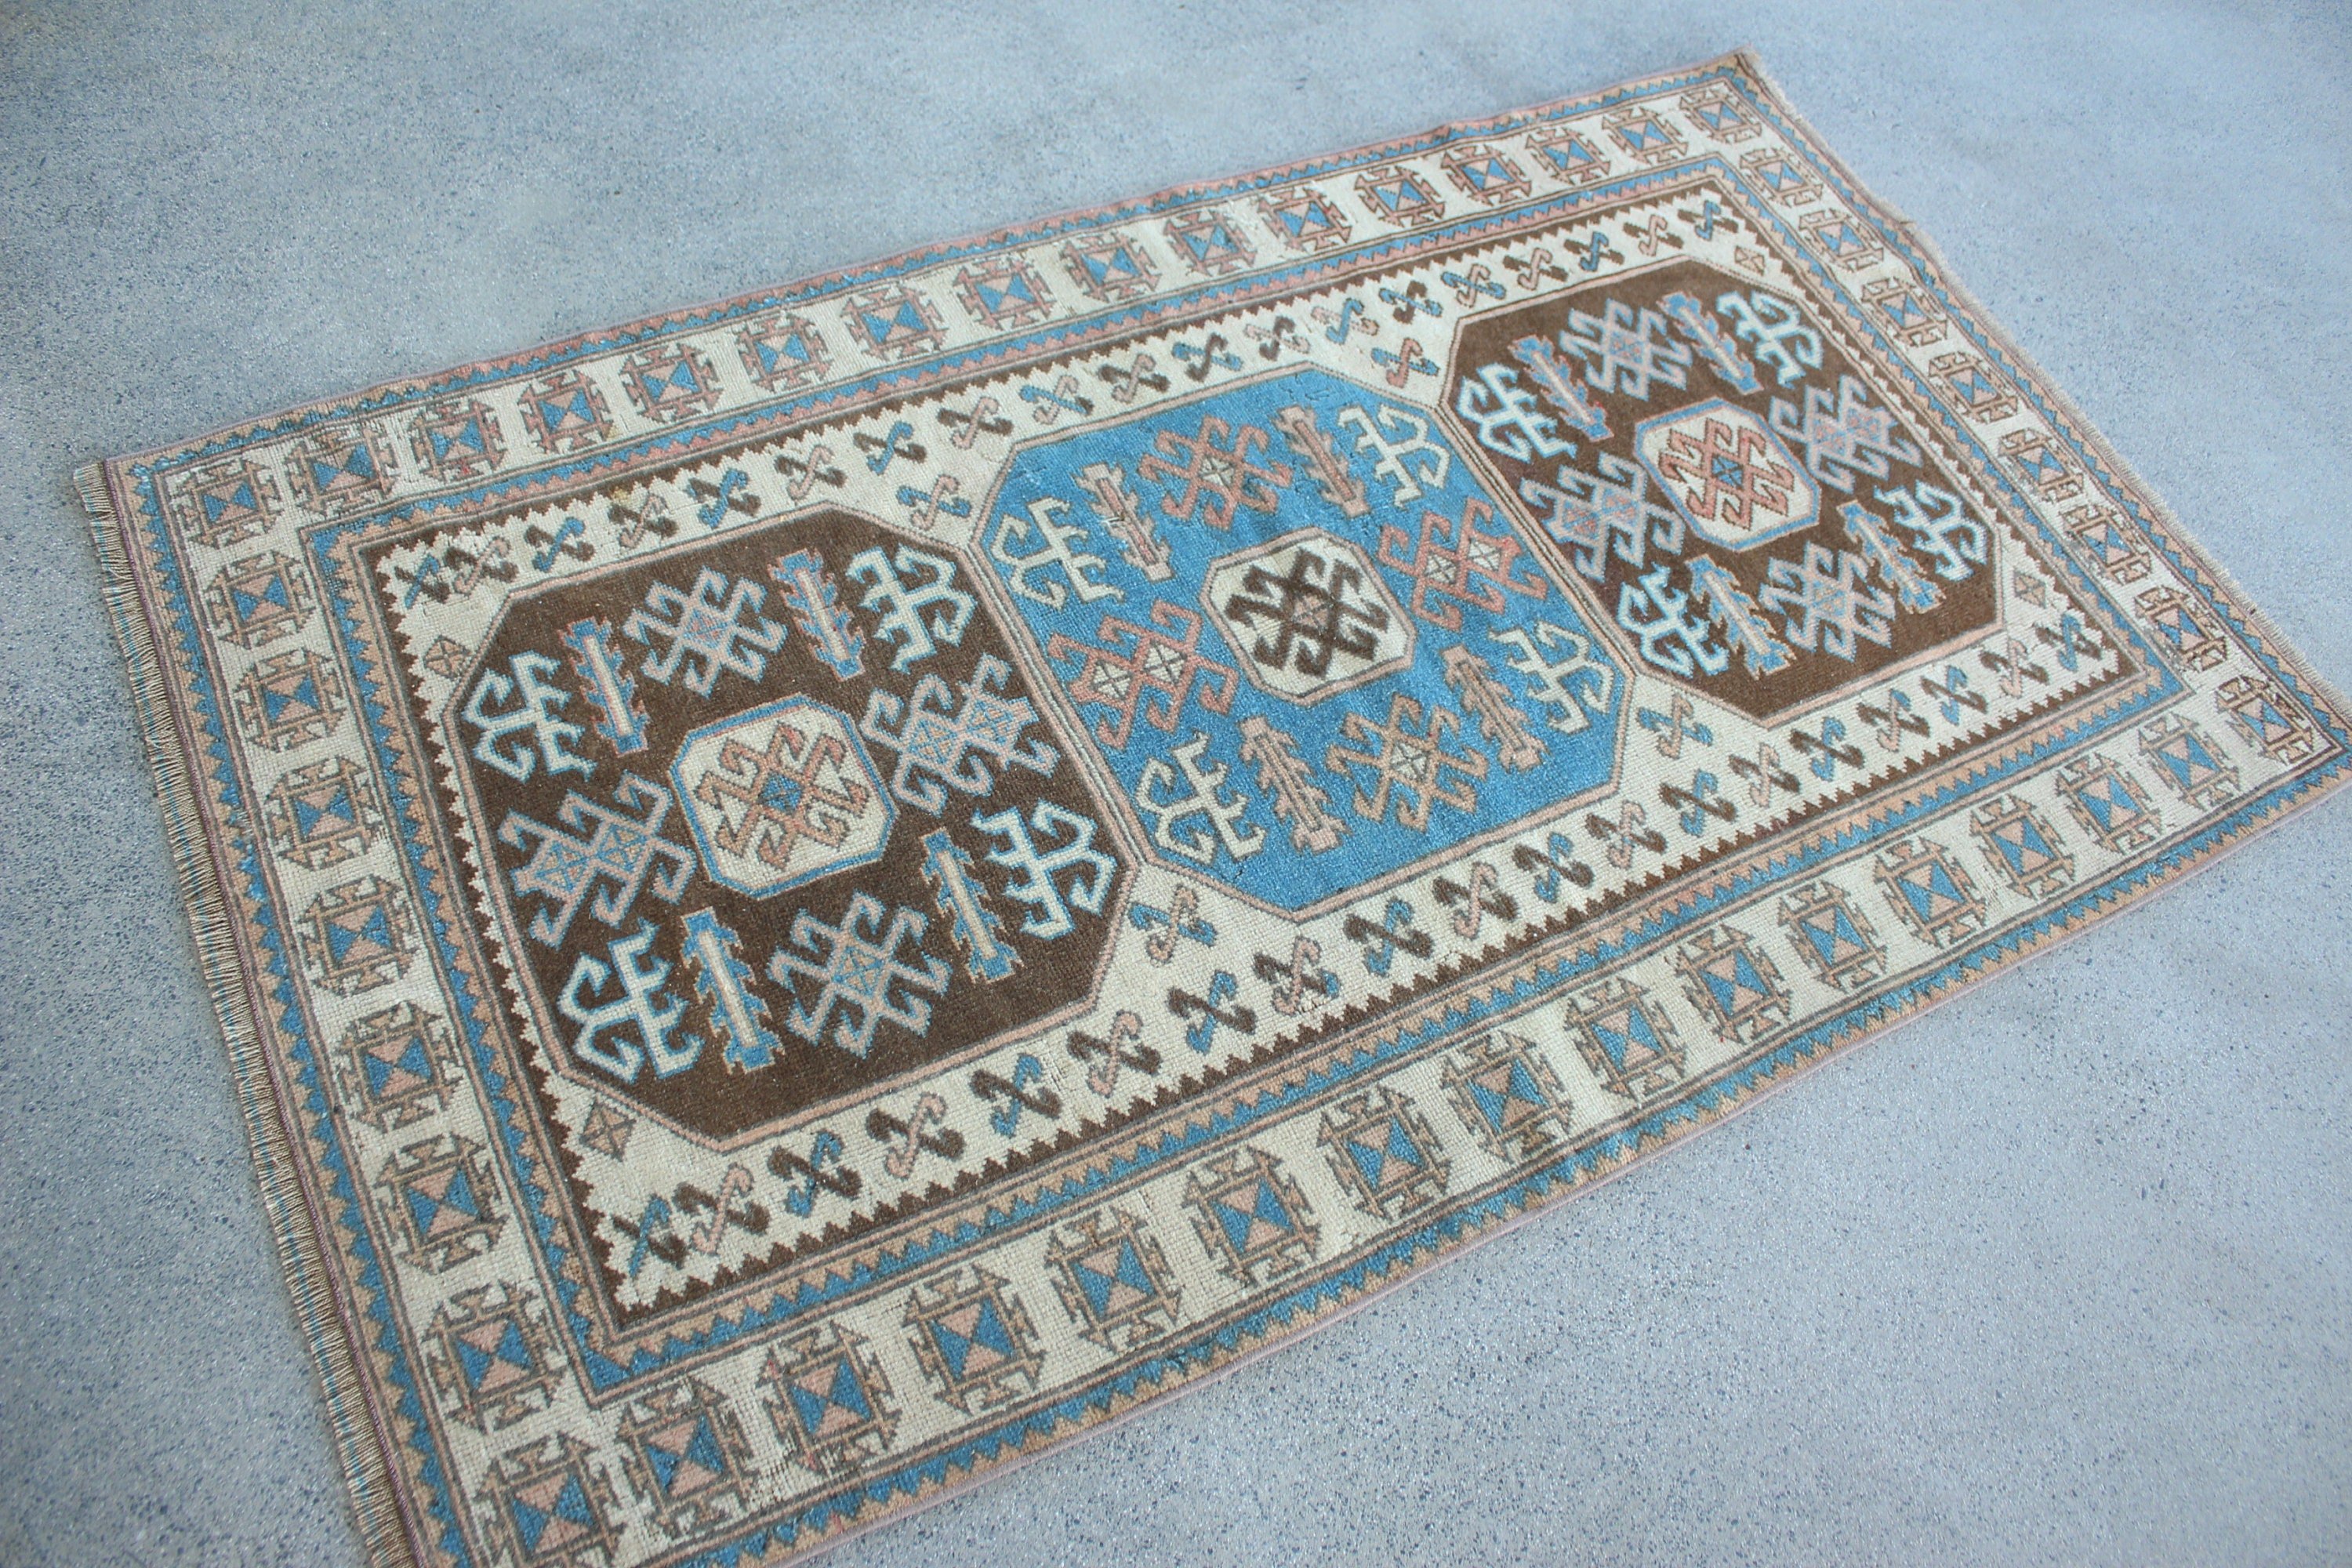 Cool Rug, Vintage Rugs, Kitchen Rug, Beige Oushak Rug, Rugs for Kitchen, Anatolian Rug, Turkish Rug, 3.4x5.6 ft Accent Rug, Nursery Rugs